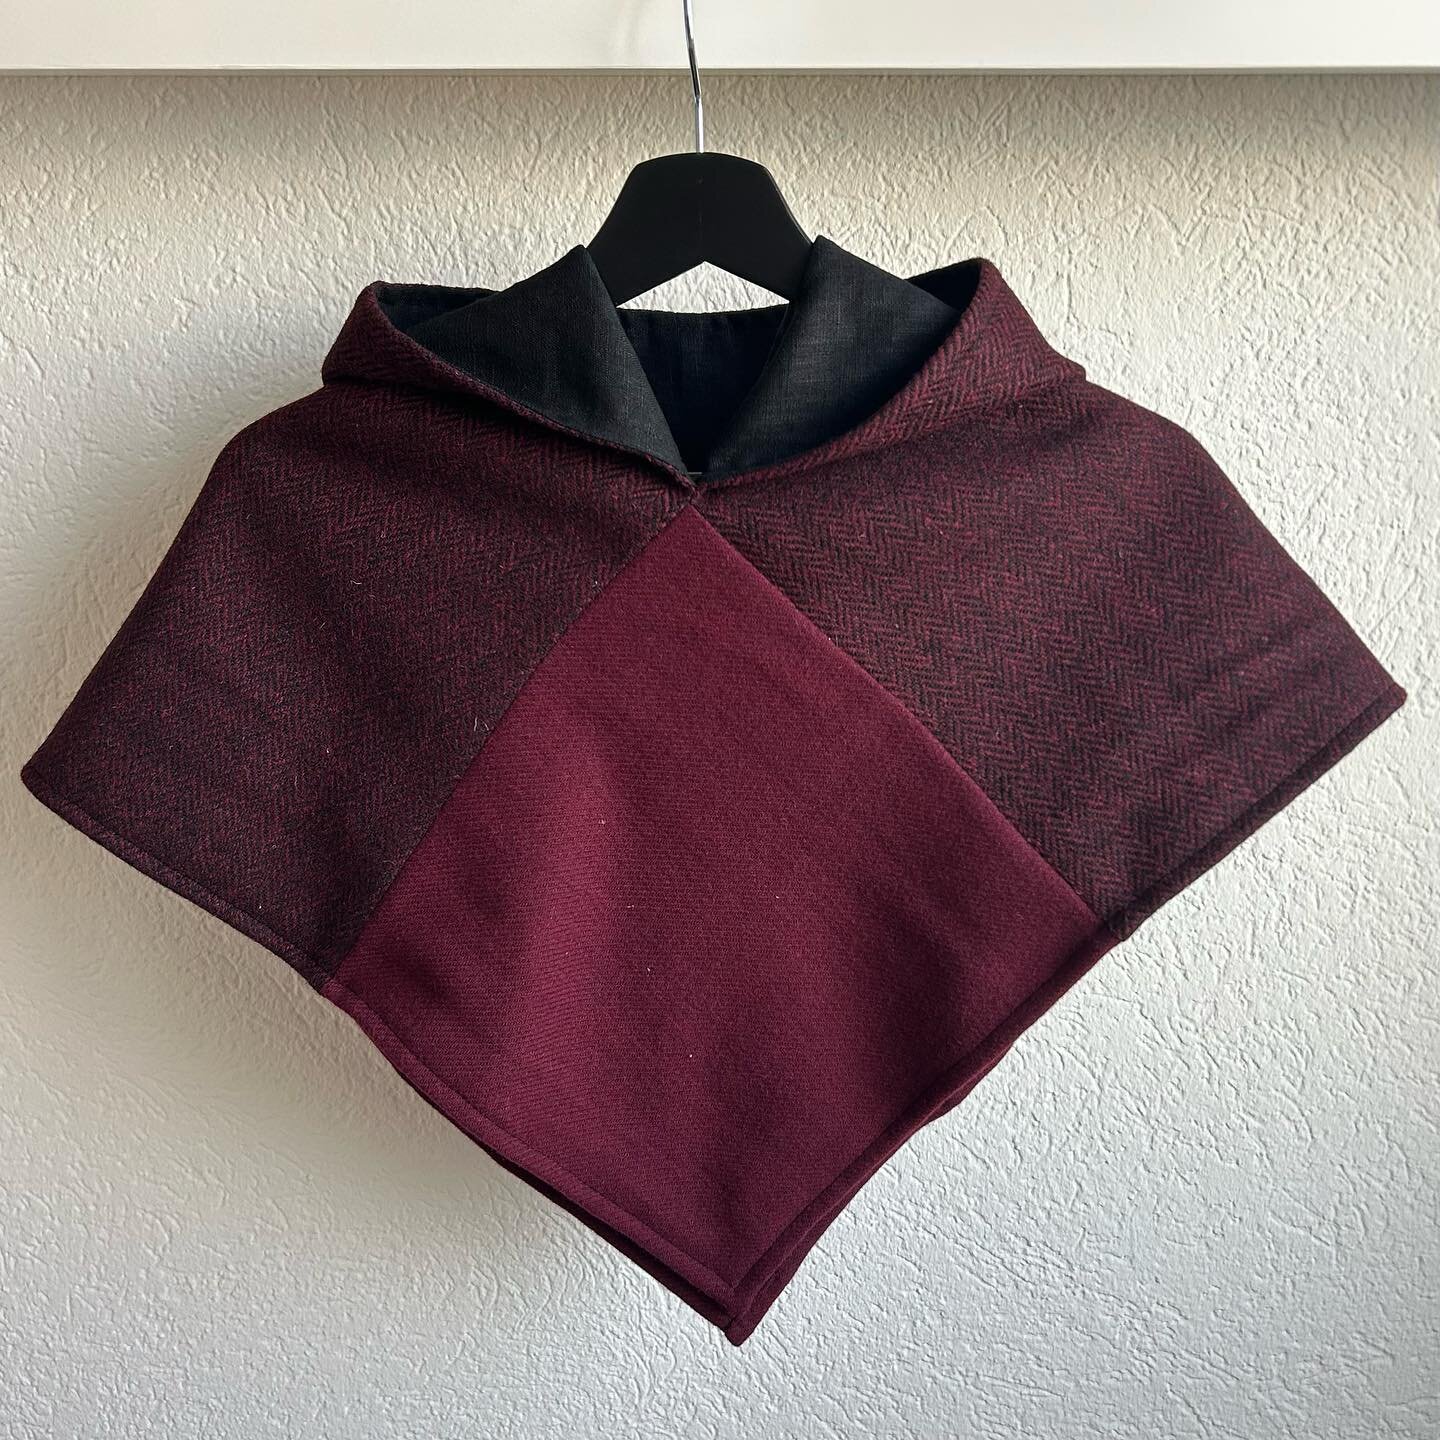 Dark Red Skjoldehamn Hood!

There is a new Skjoldehamn hood available in our shop - with a fixed set of colors: Dark red &amp; red for the wool and black for the linen (lining) inside. 

Of course, this model also features a small pocket in the front